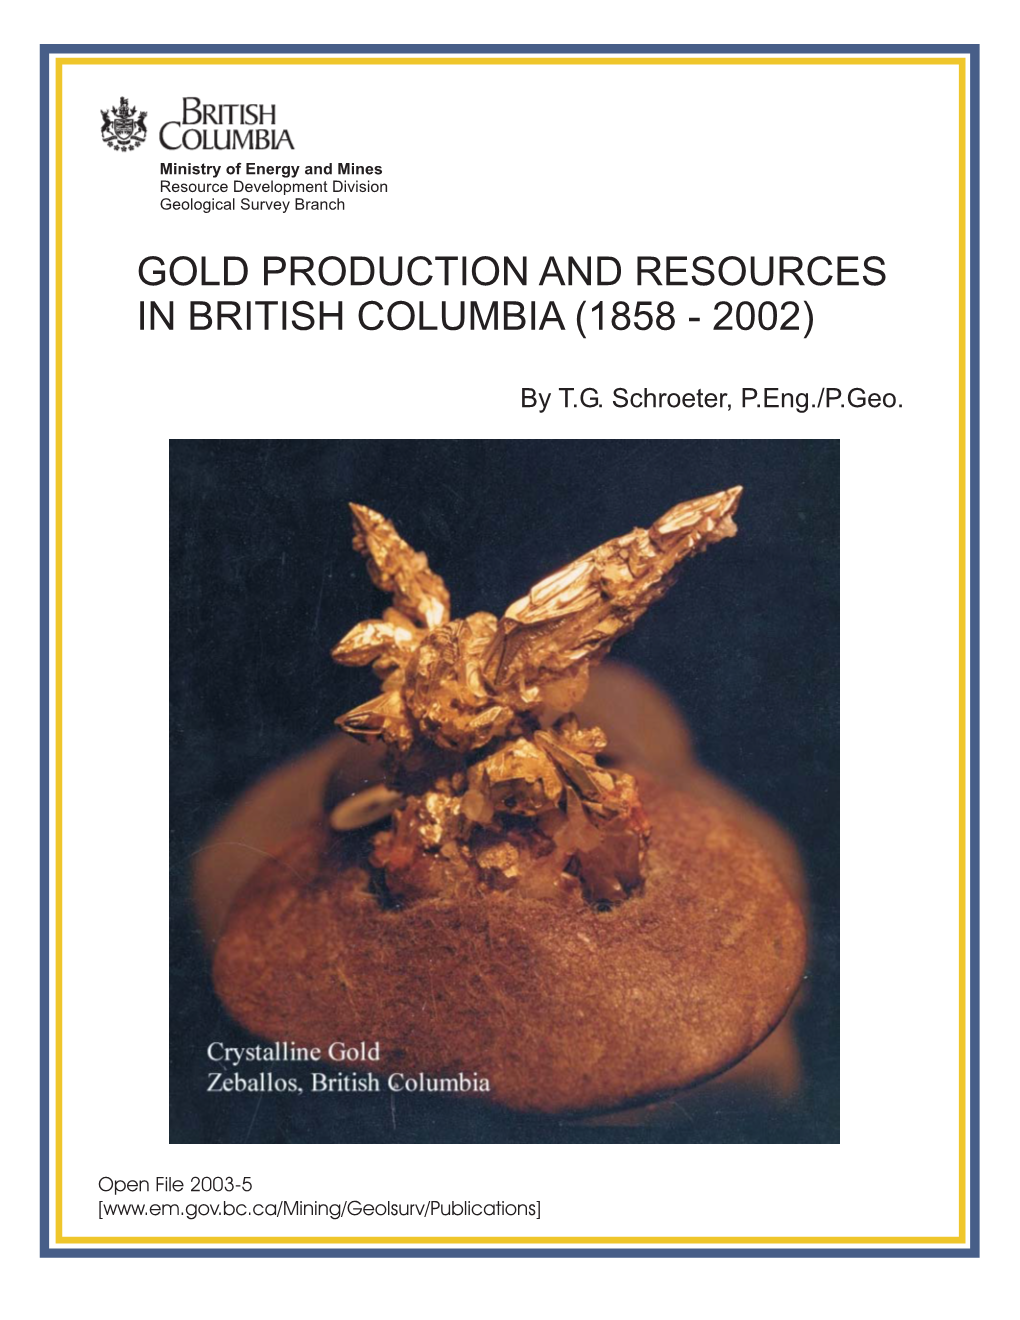 Gold Production and Resources in British Columbia (1858 - 2002)